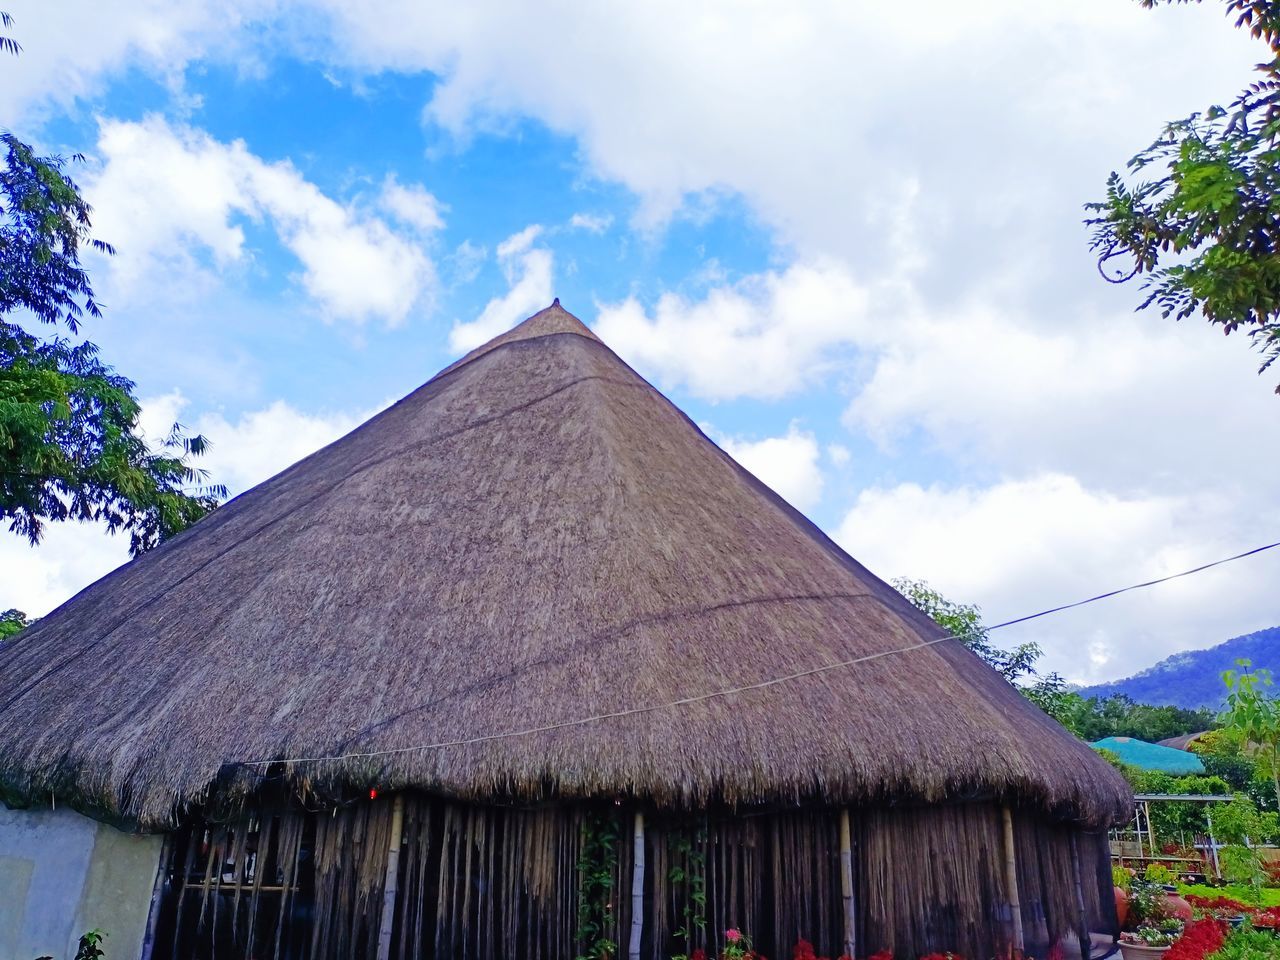 thatched roof, roof, thatching, architecture, sky, cloud, built structure, hut, nature, building exterior, building, plant, house, no people, landscape, travel destinations, rural area, outdoors, land, tree, travel, beauty in nature, day, tradition, mountain, rural scene, environment, tourism, village, scenics - nature